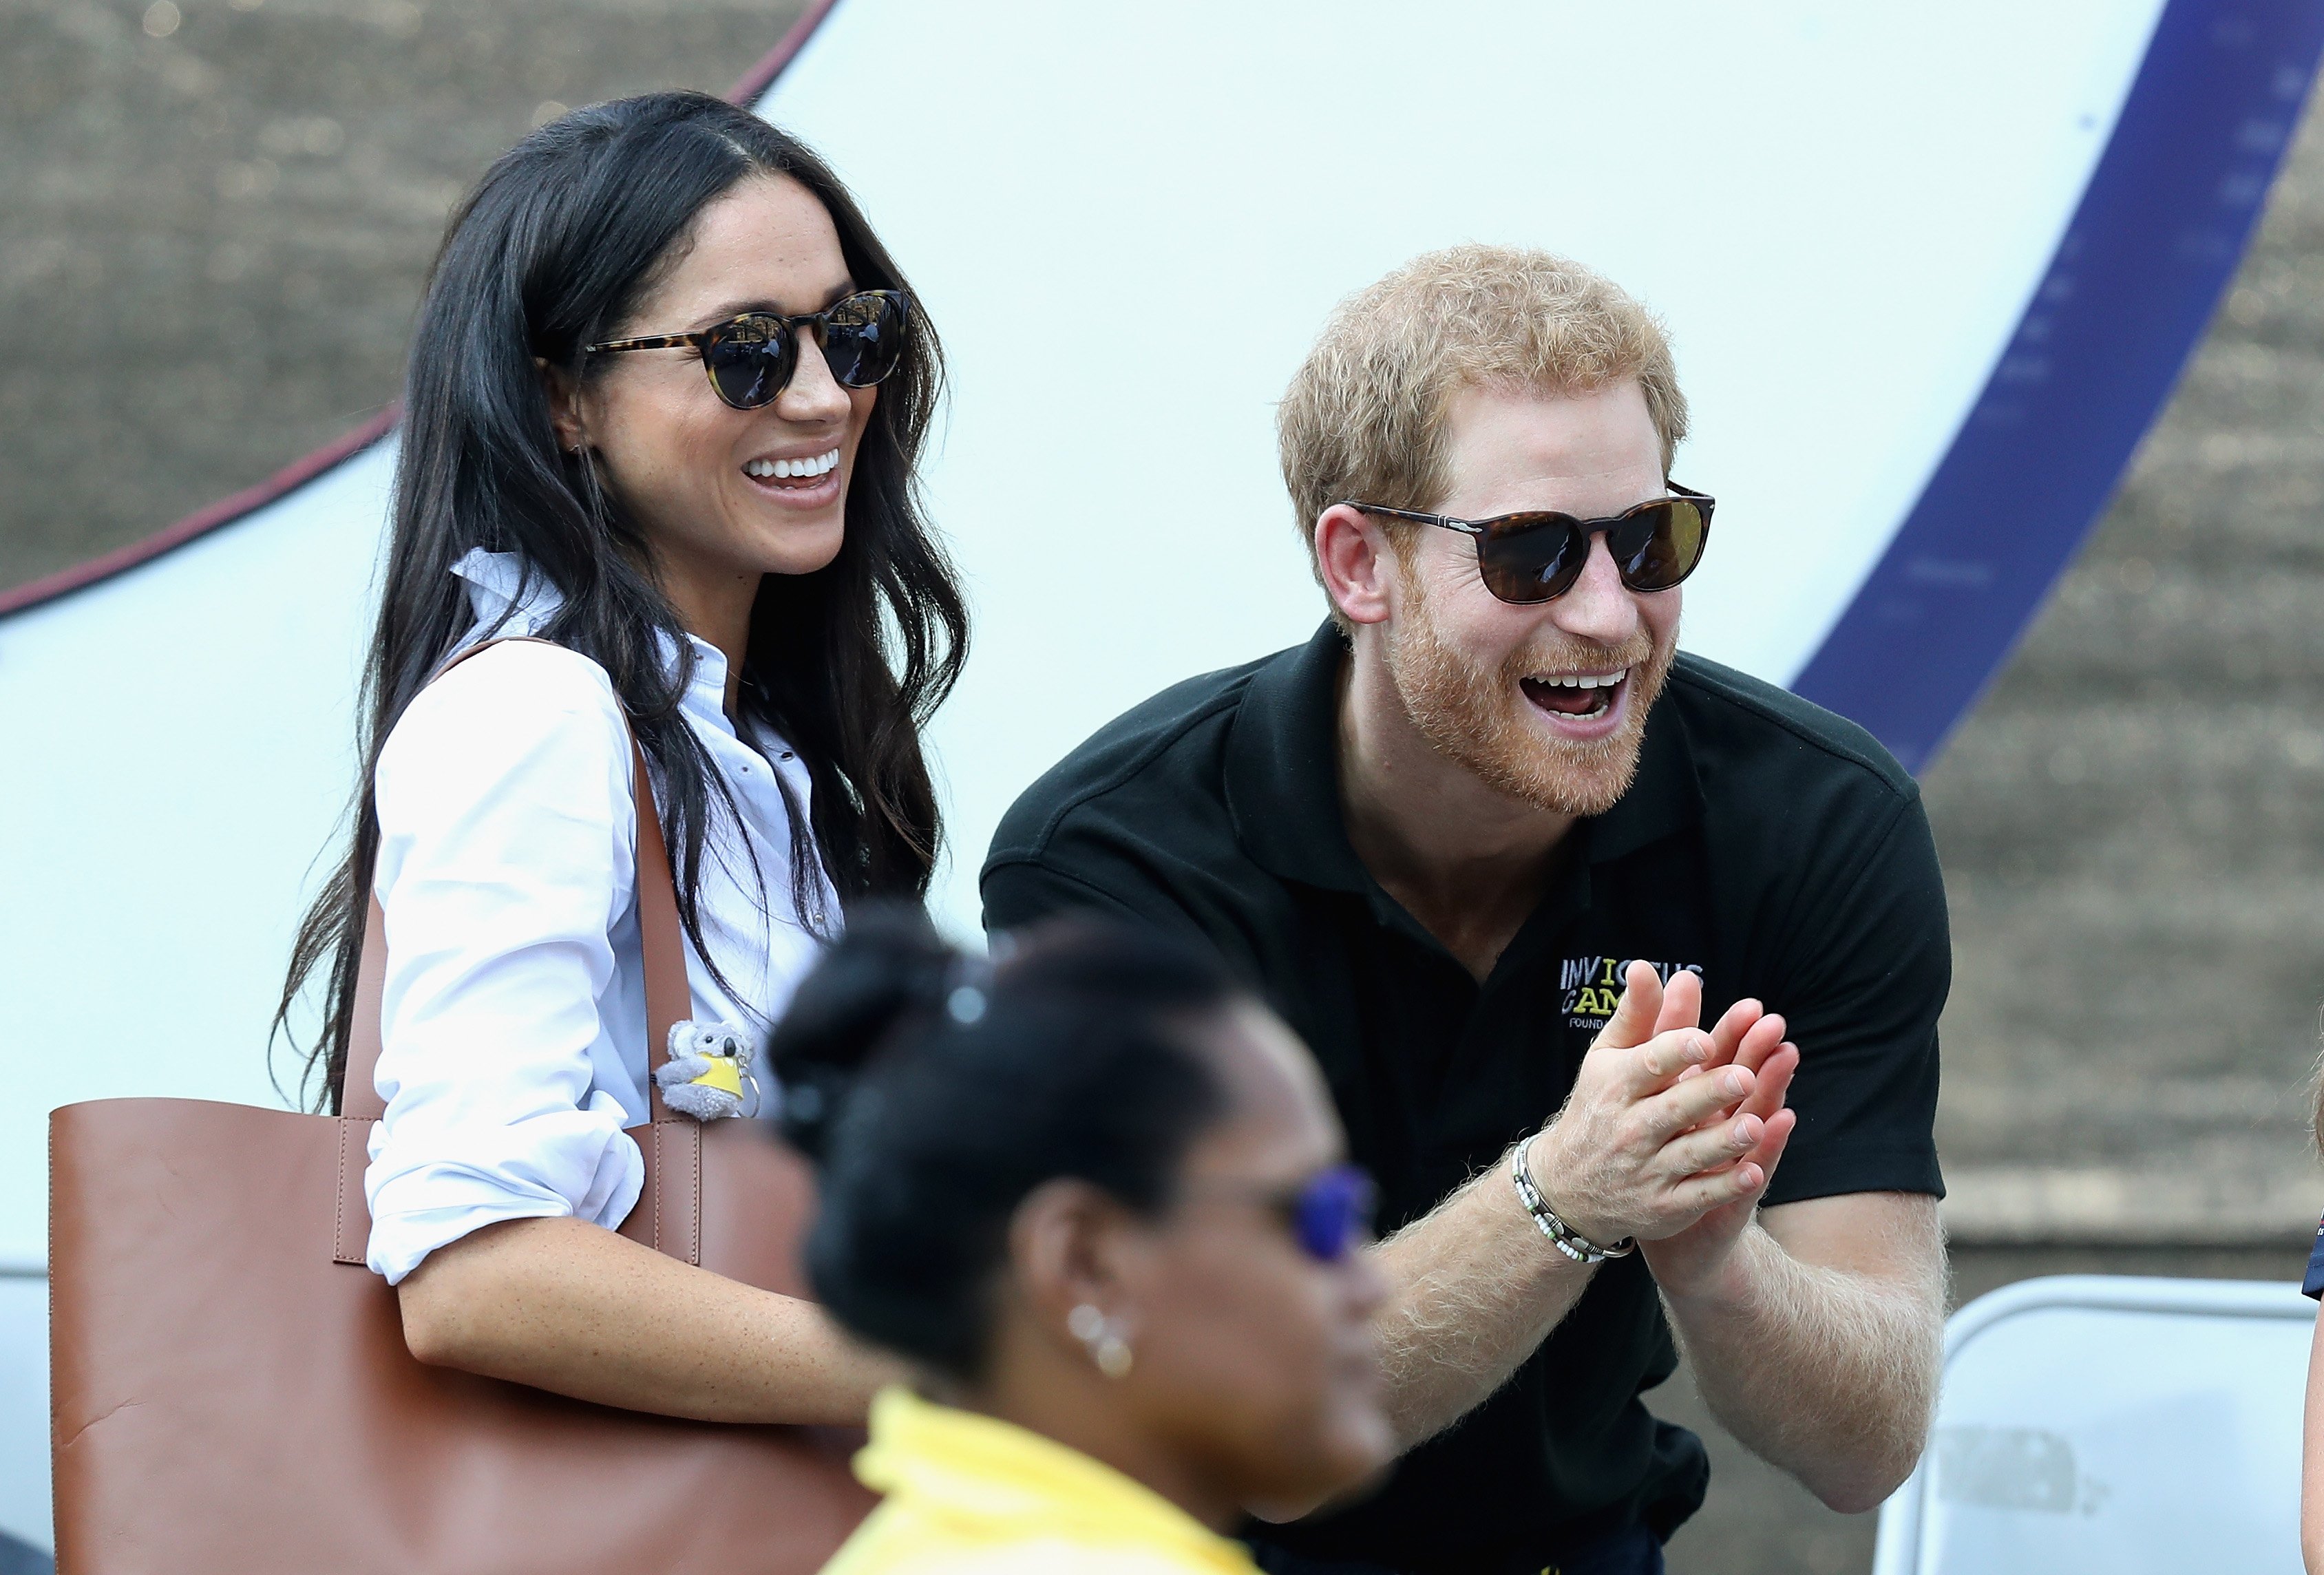 Prince Harry and Meghan Markle attend a Wheelchair Tennis match during the Invictus Games 2017. | Source: Getty Images